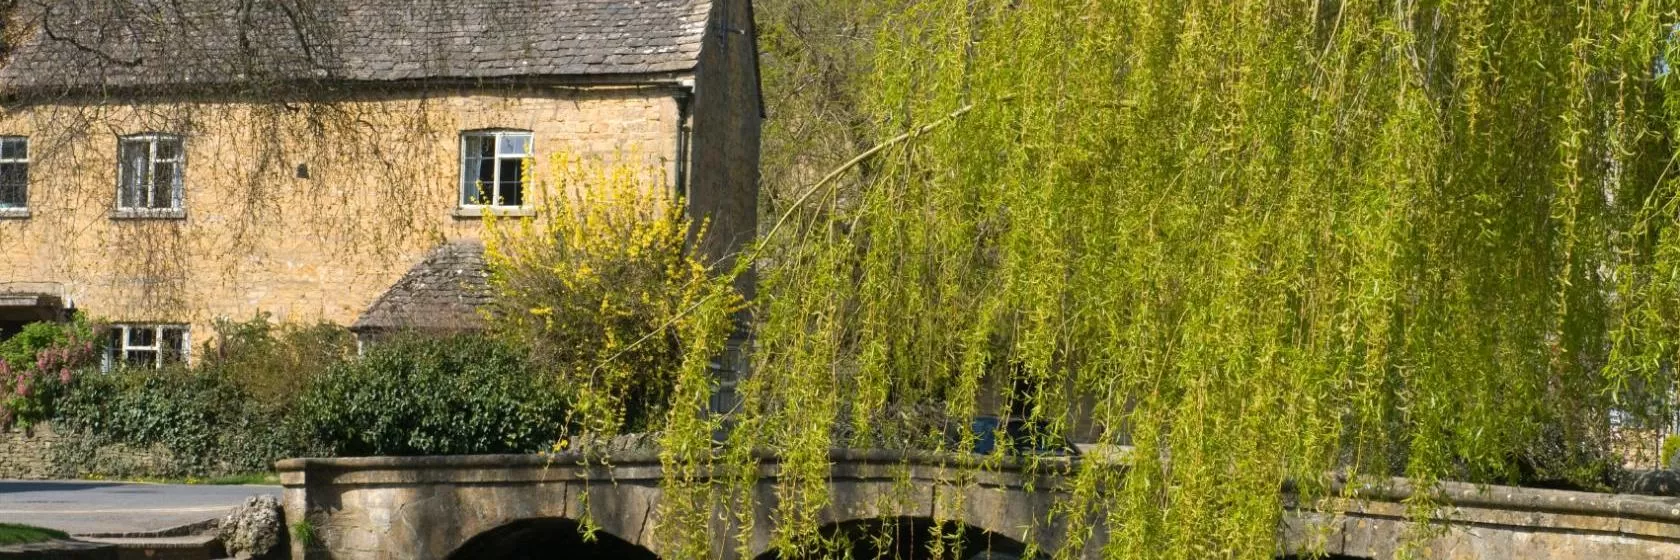 Bourton on the Water, Gloucestershire Hotels